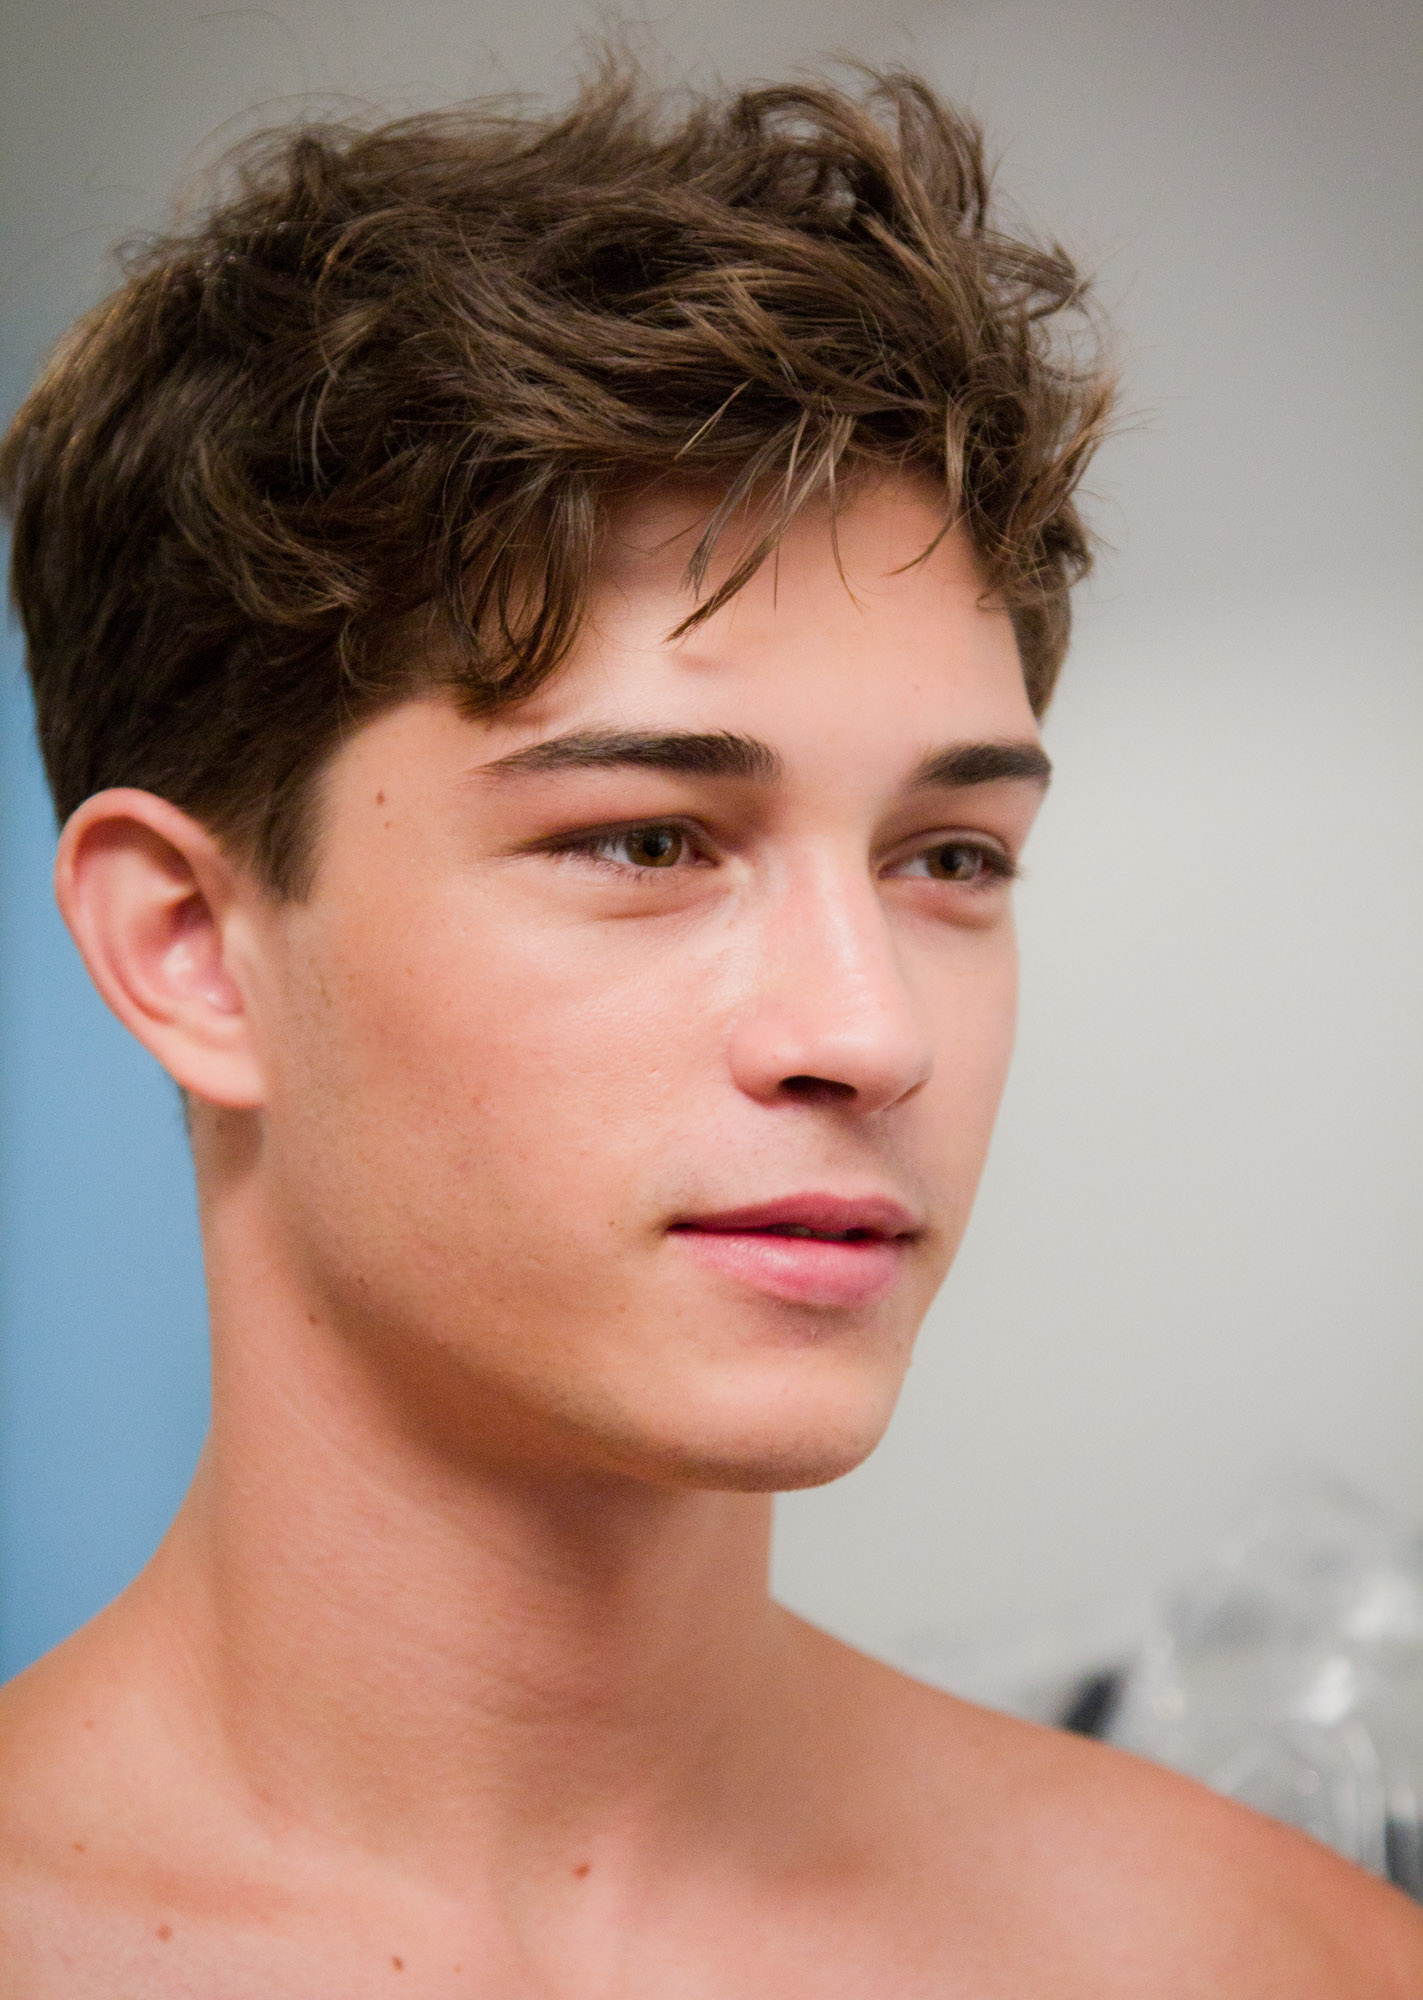 Image result for chico lachowski]